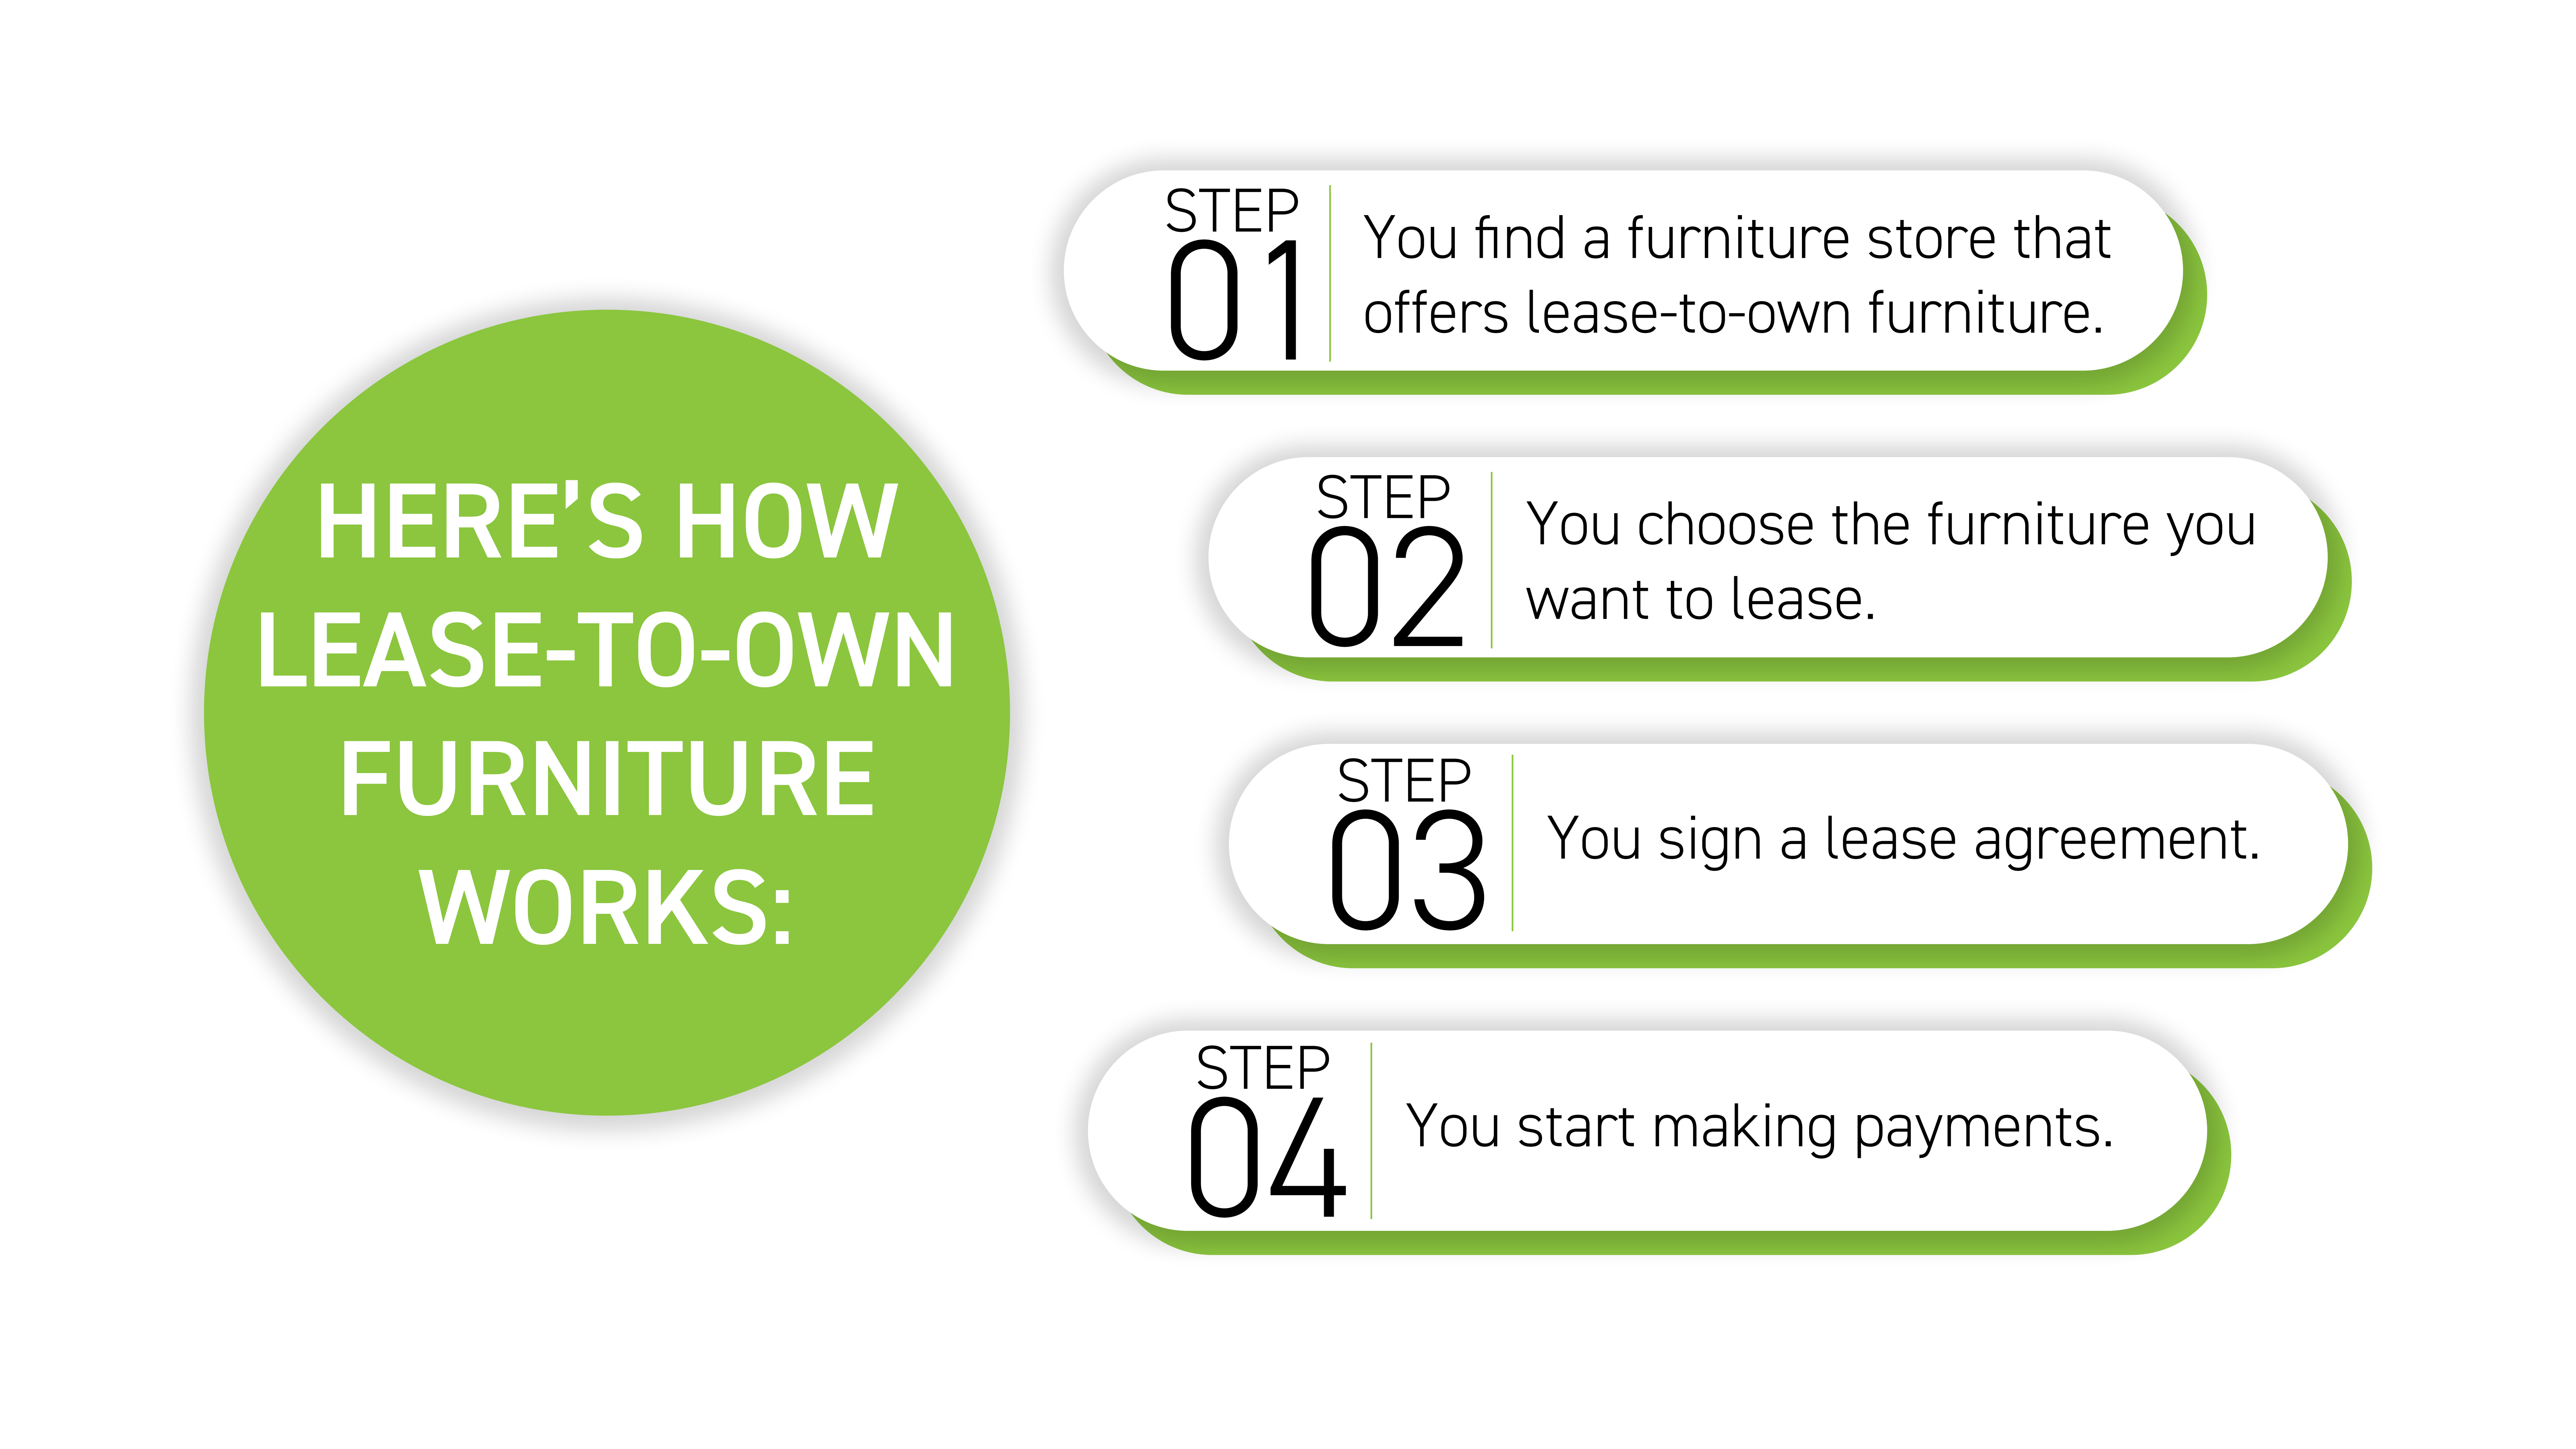 How Lease-to-own works